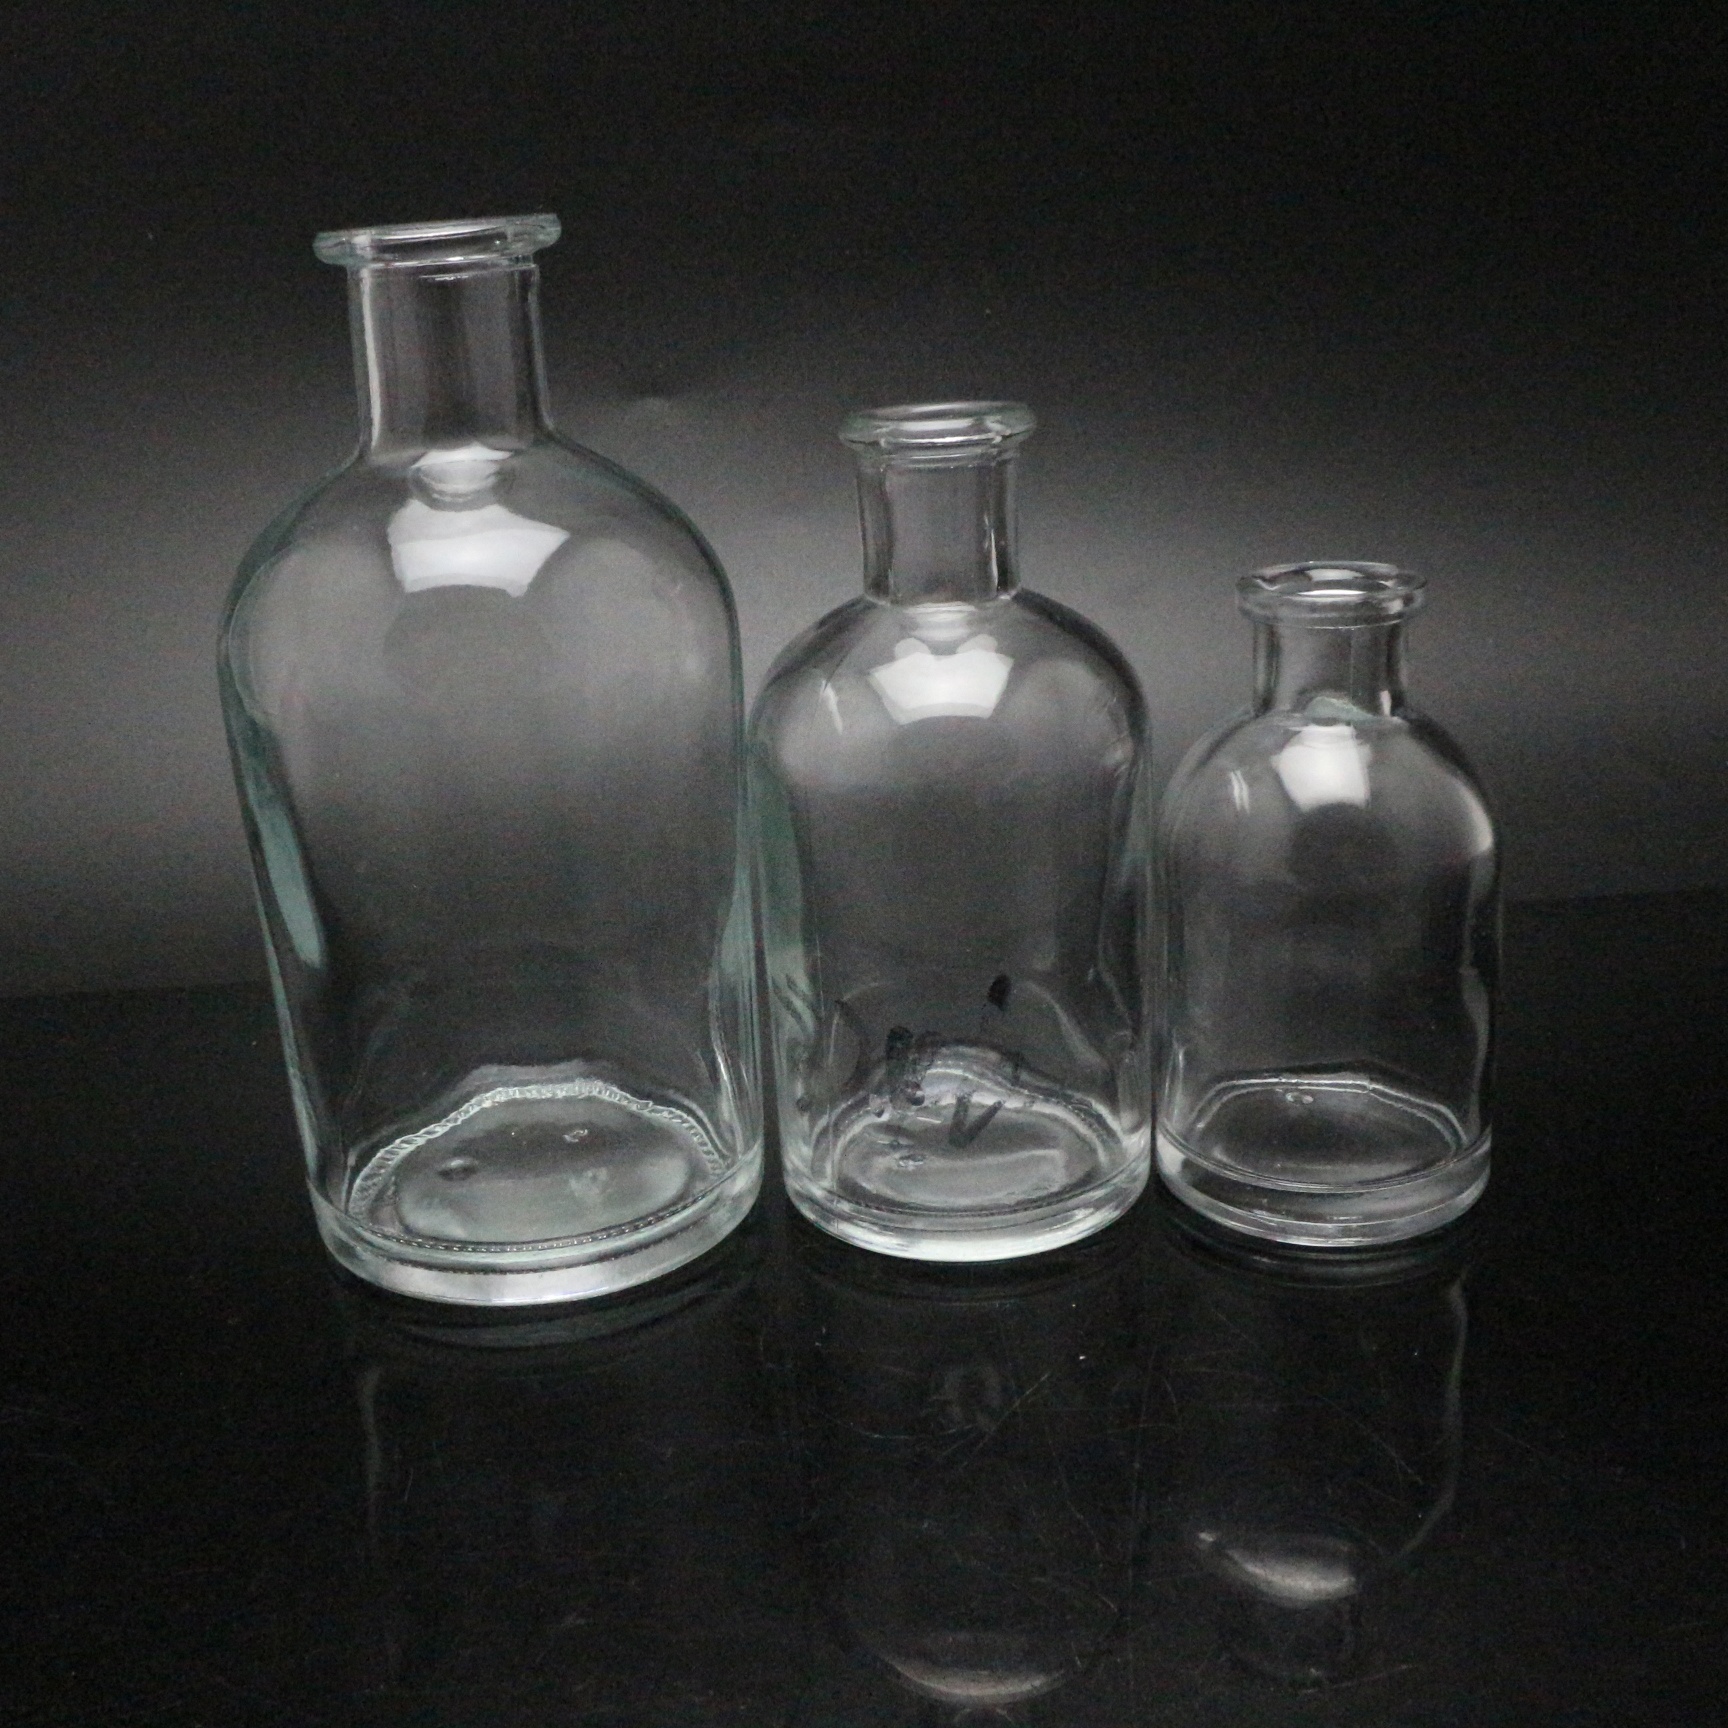 Aromatherapy diffuser bottles 100ml clear glass with natural cork